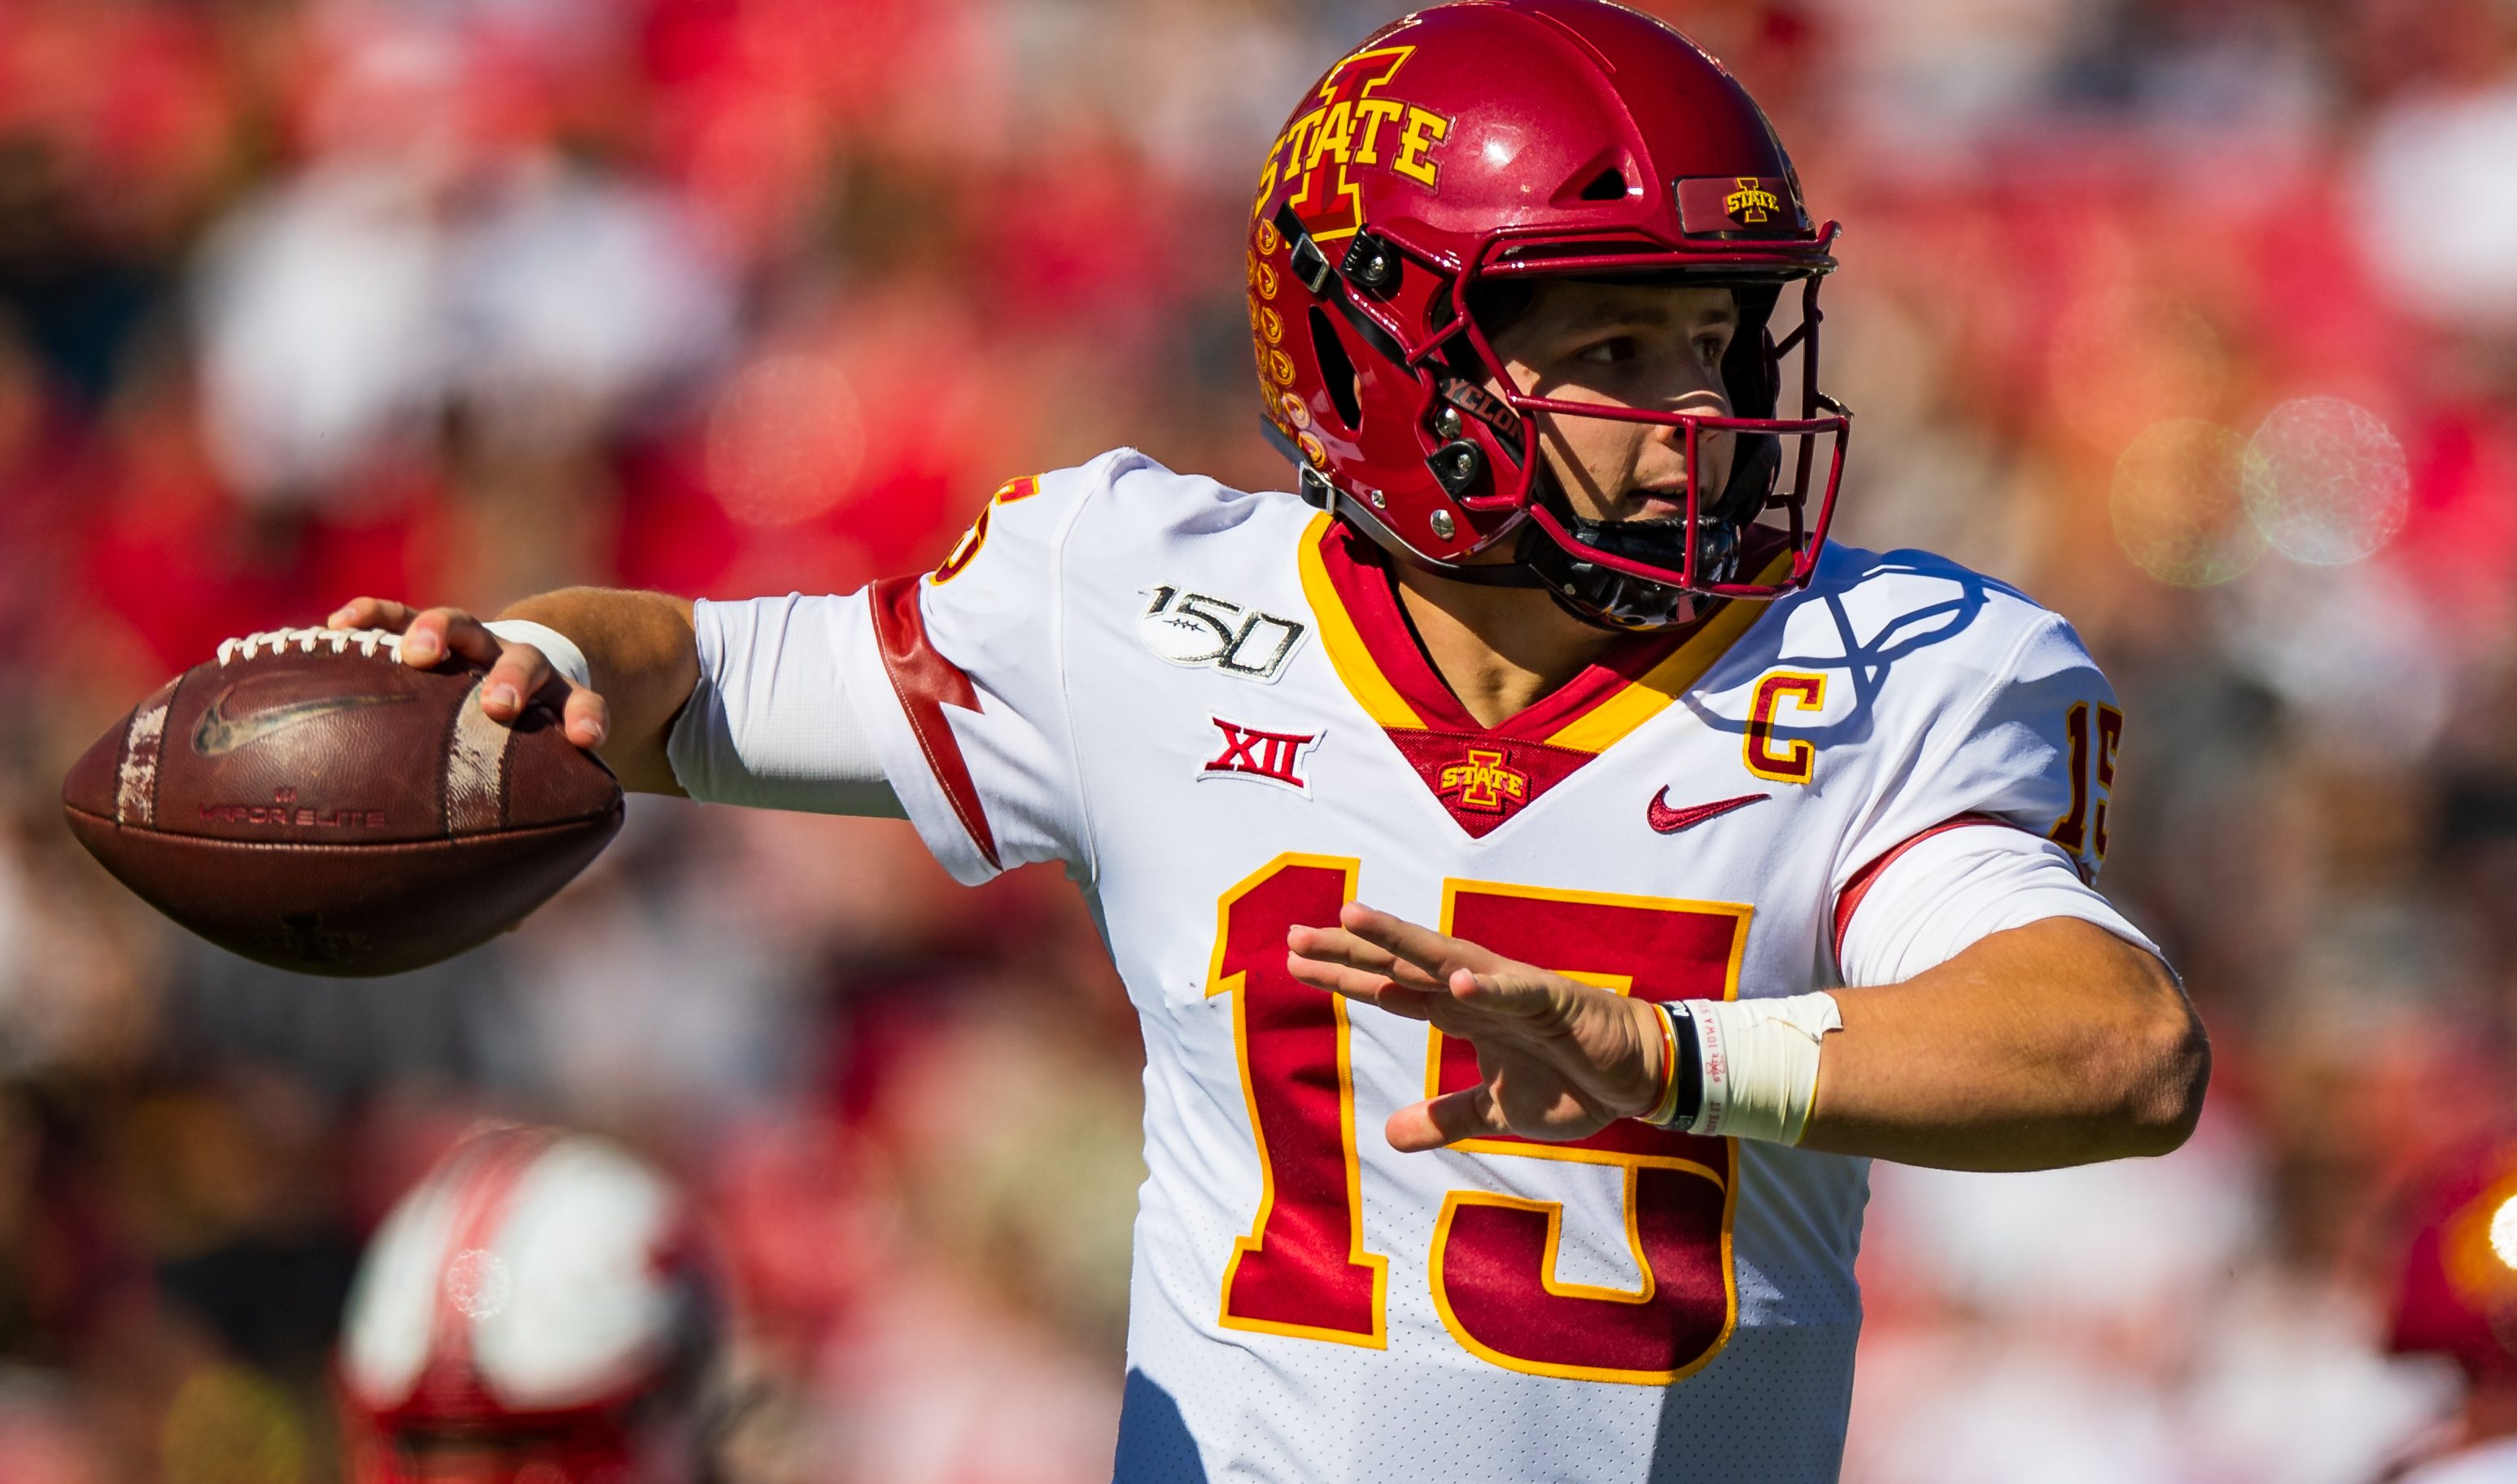 How to Watch Iowa State Football Without Cable